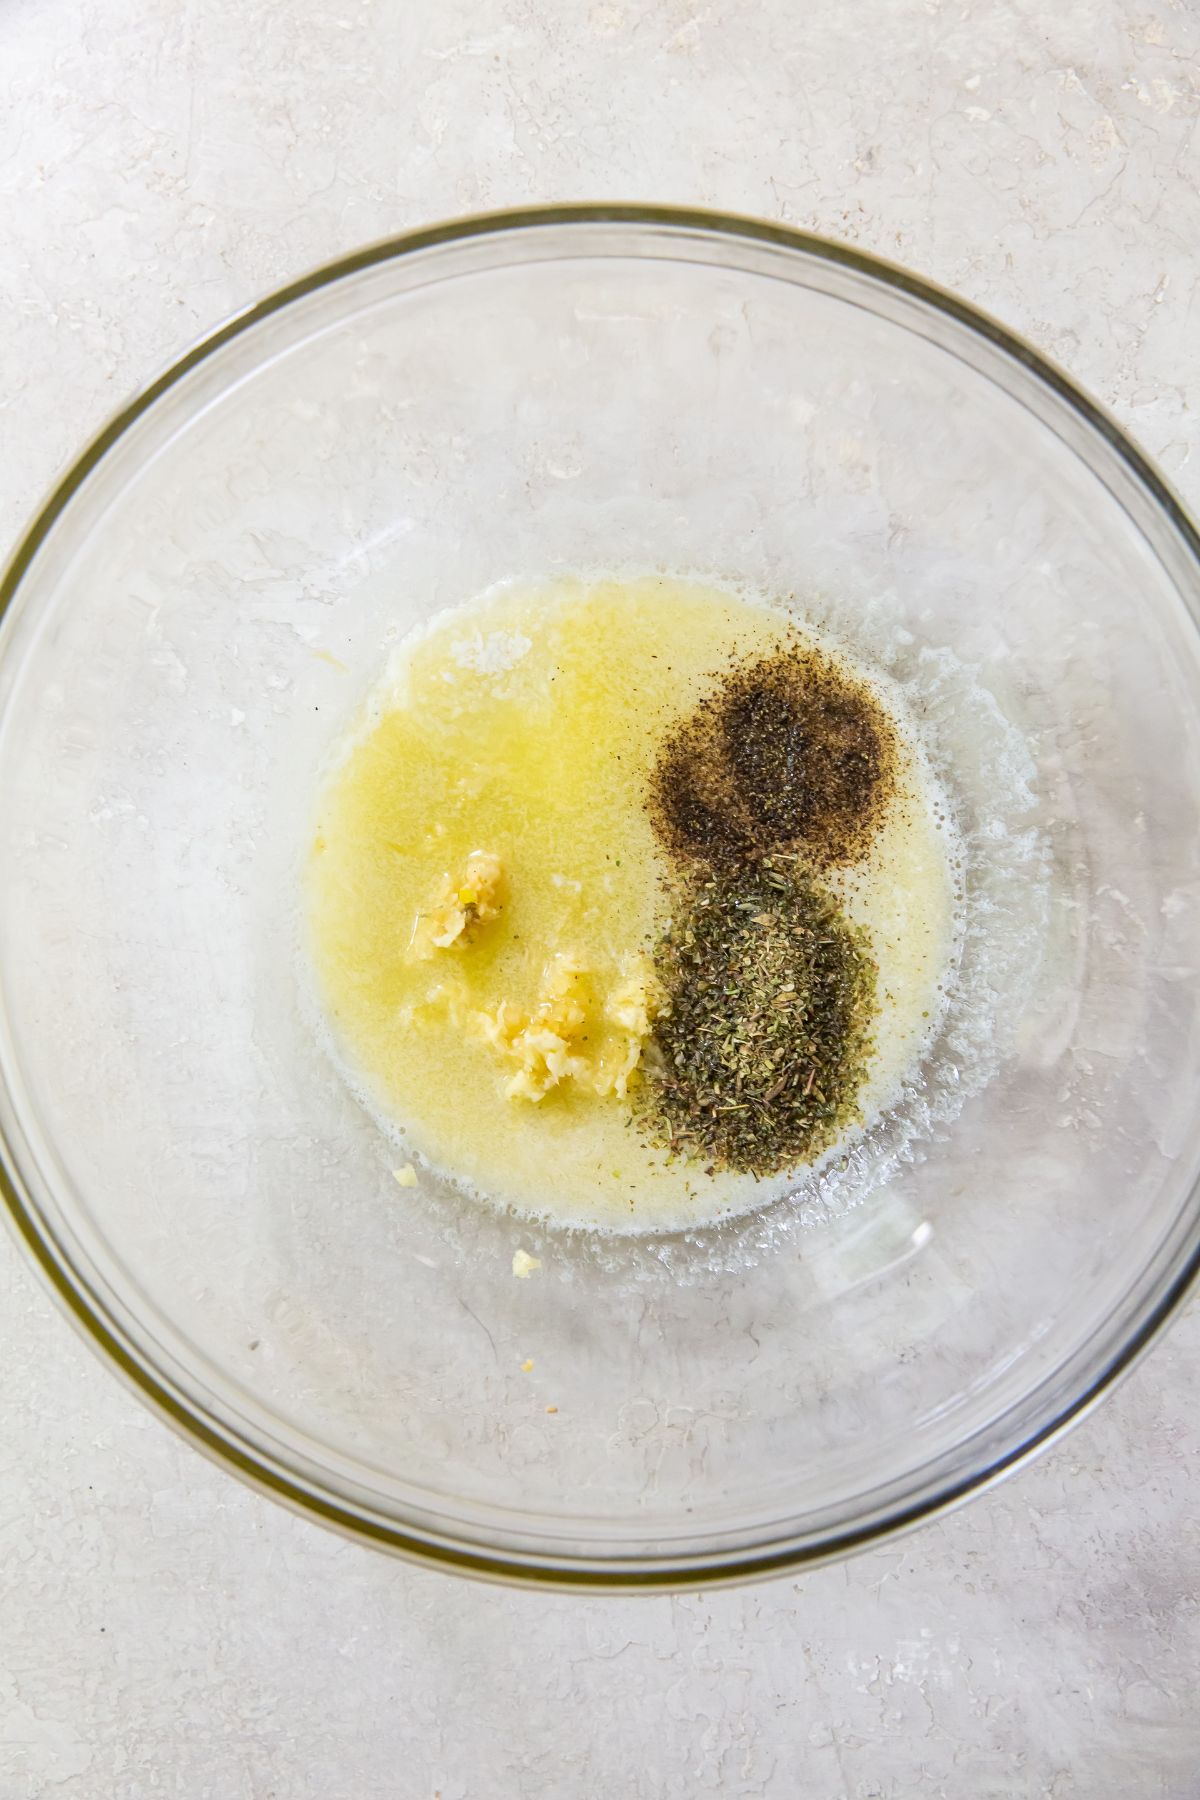 Melted butter and spices in a glass bowl on a white tabletop